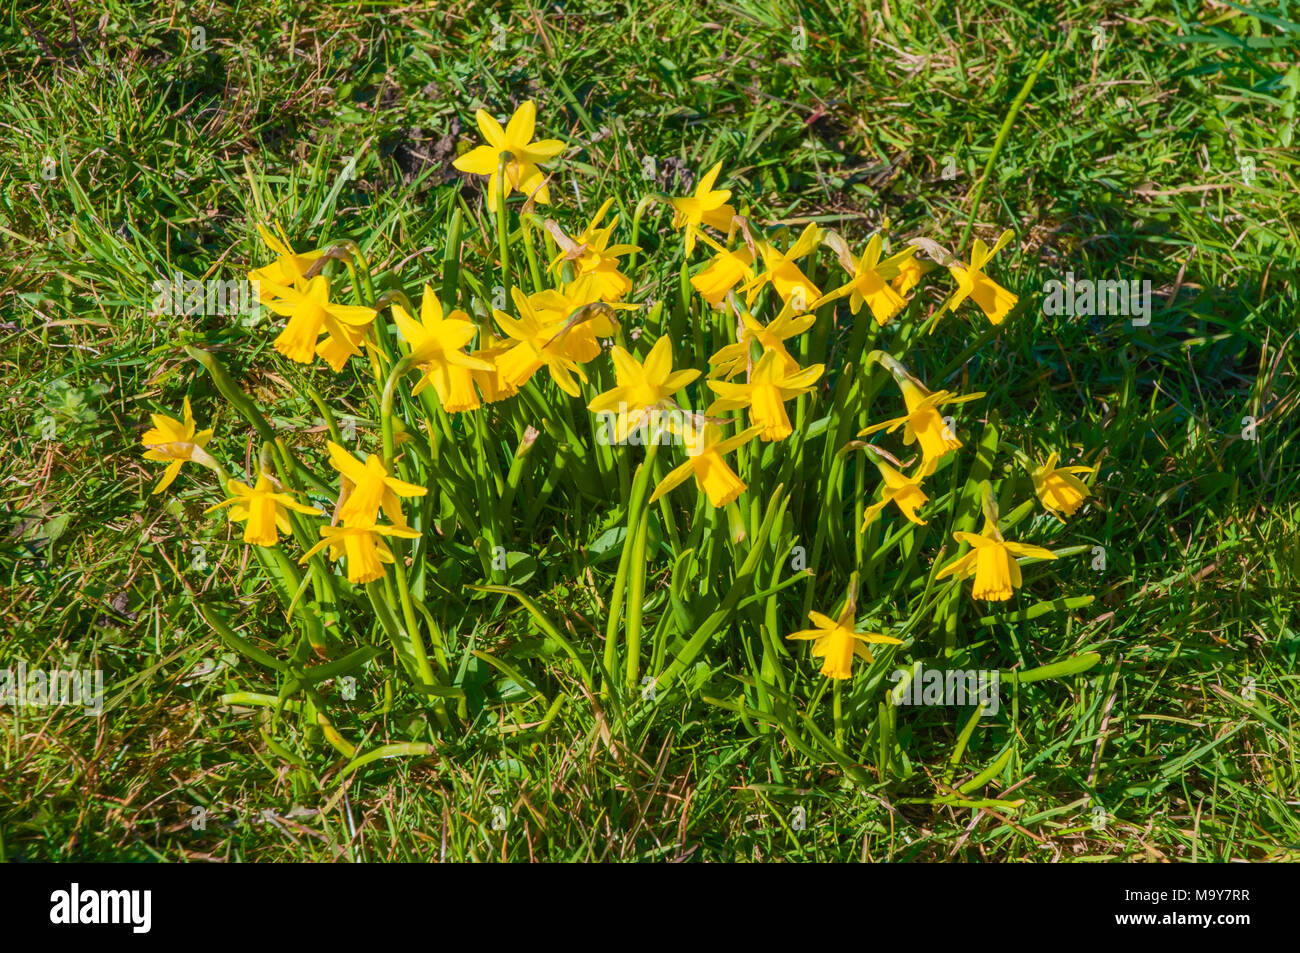 Clump of Narcissi (Daffodil) 'February Gold'.Taken in local park in Blackpool. Stock Photo